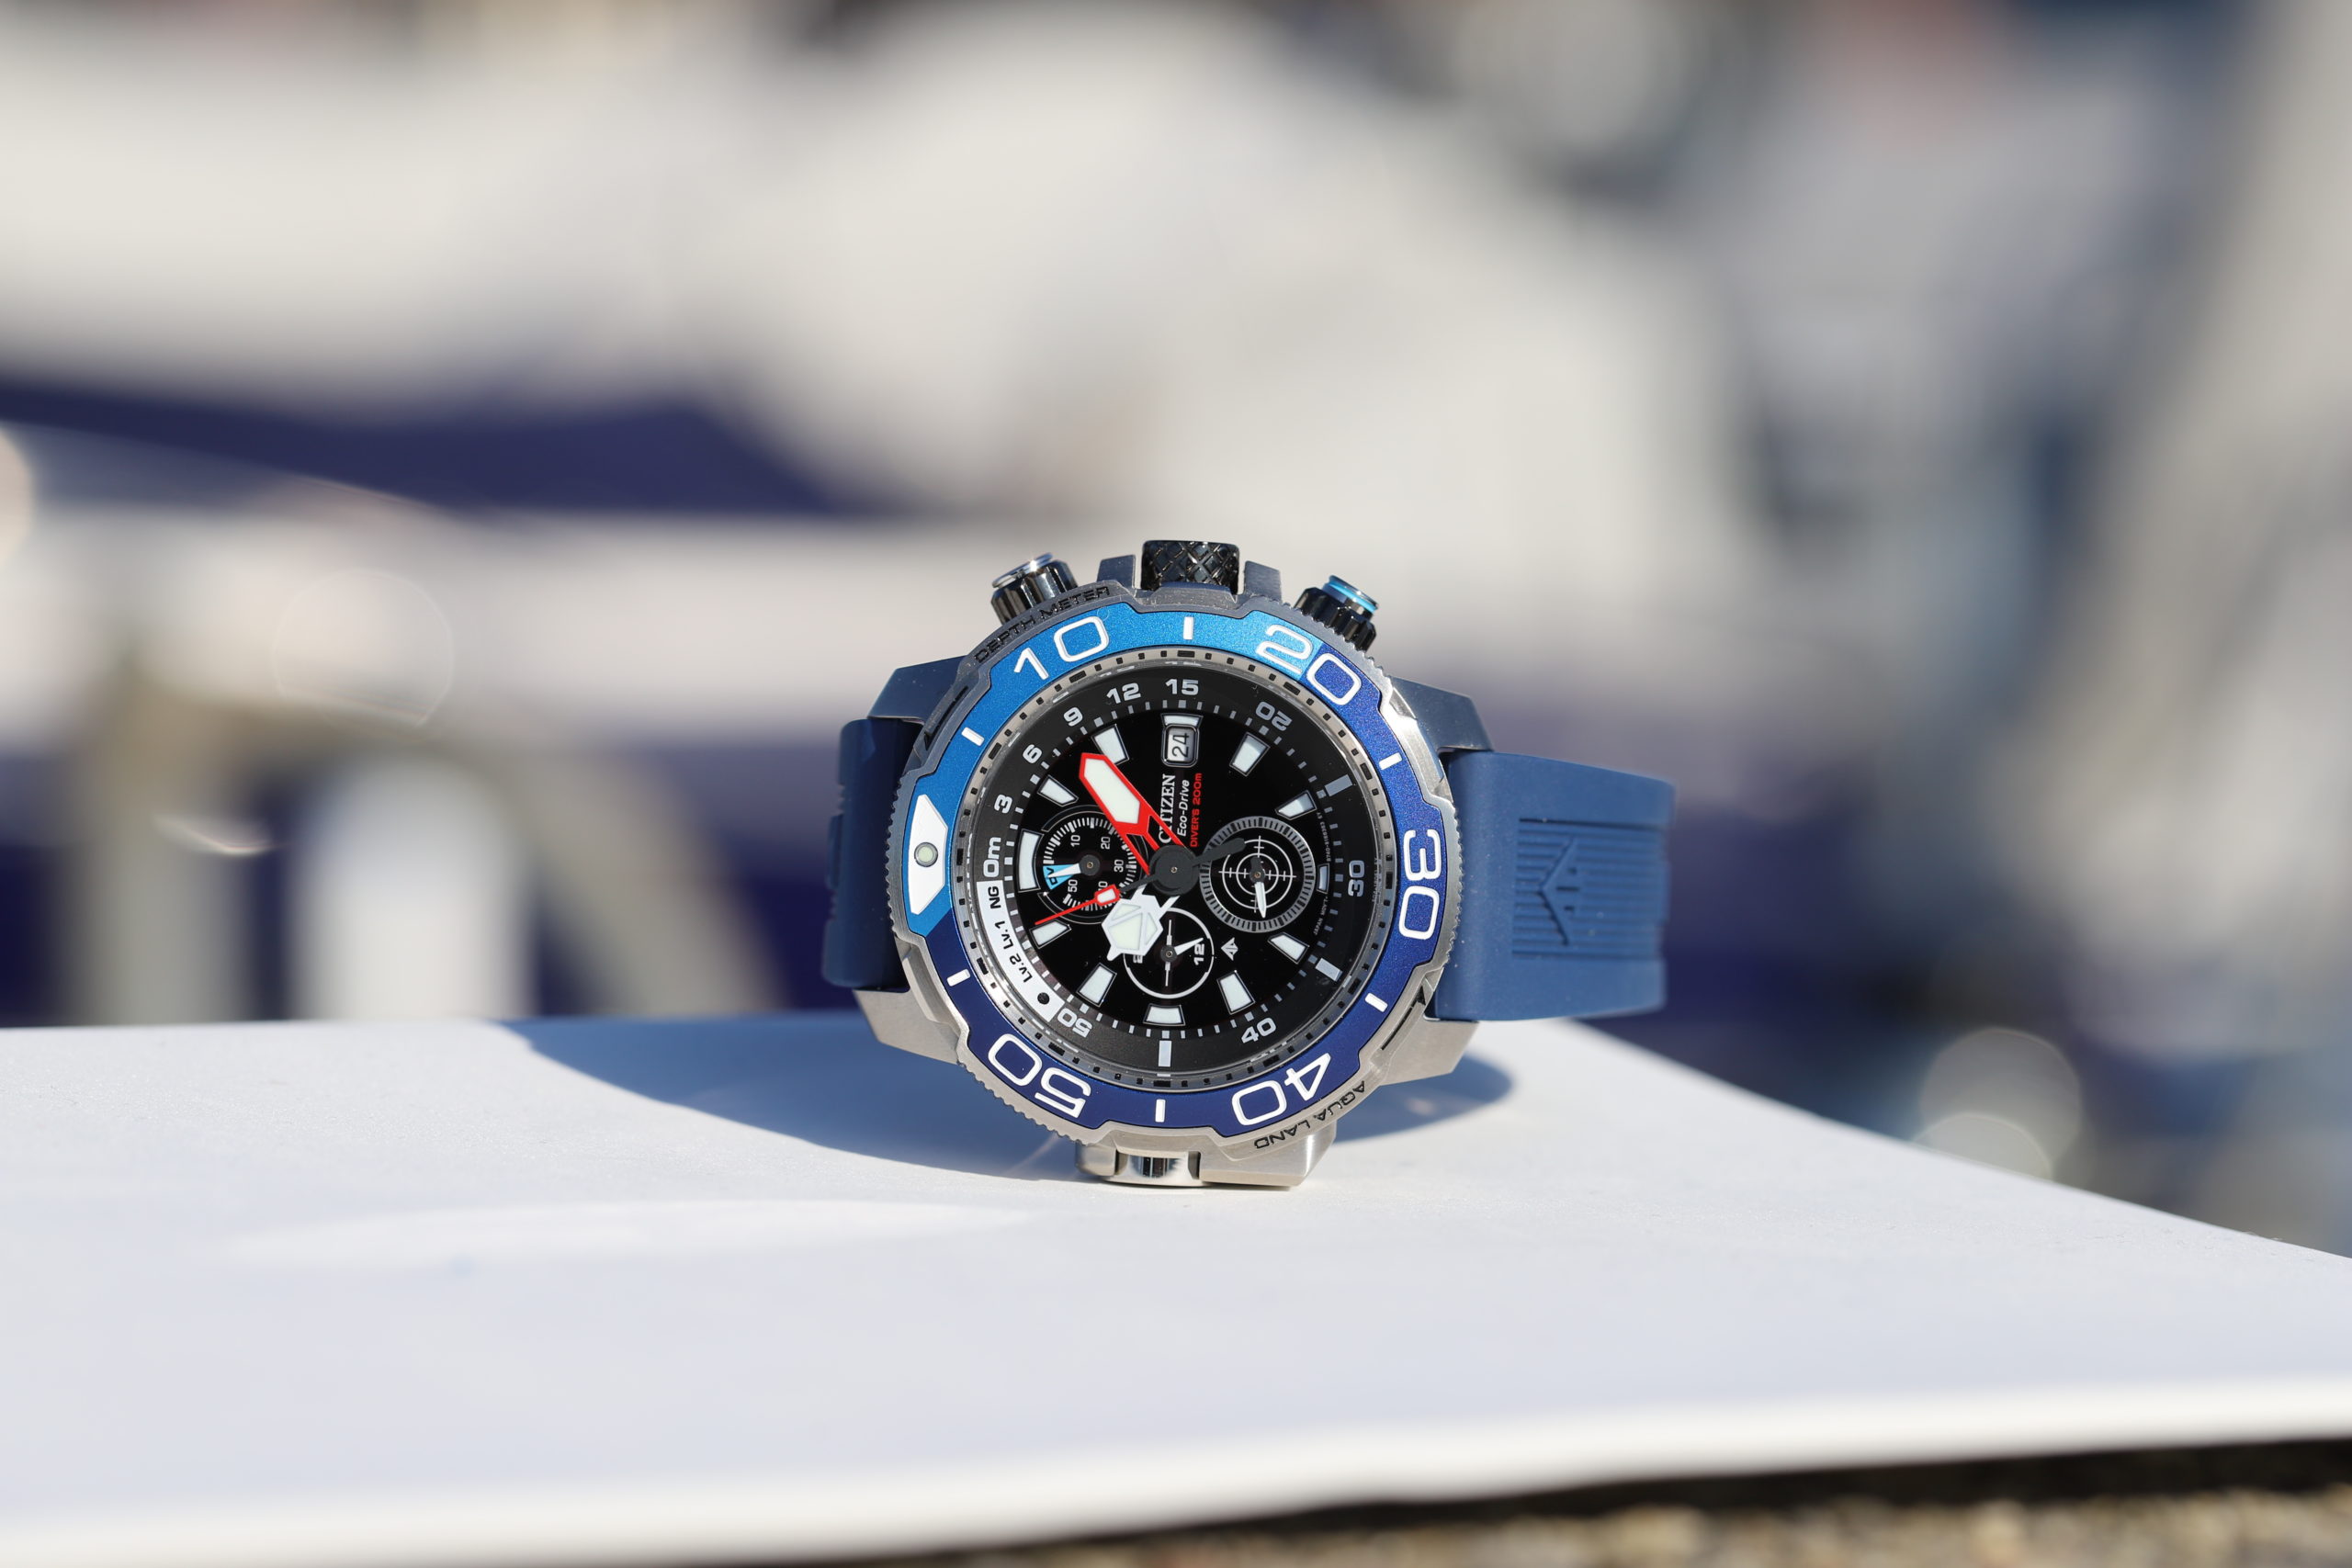 Introducing the Citizen Promaster Eco-Drive Aqualand 200m (with 